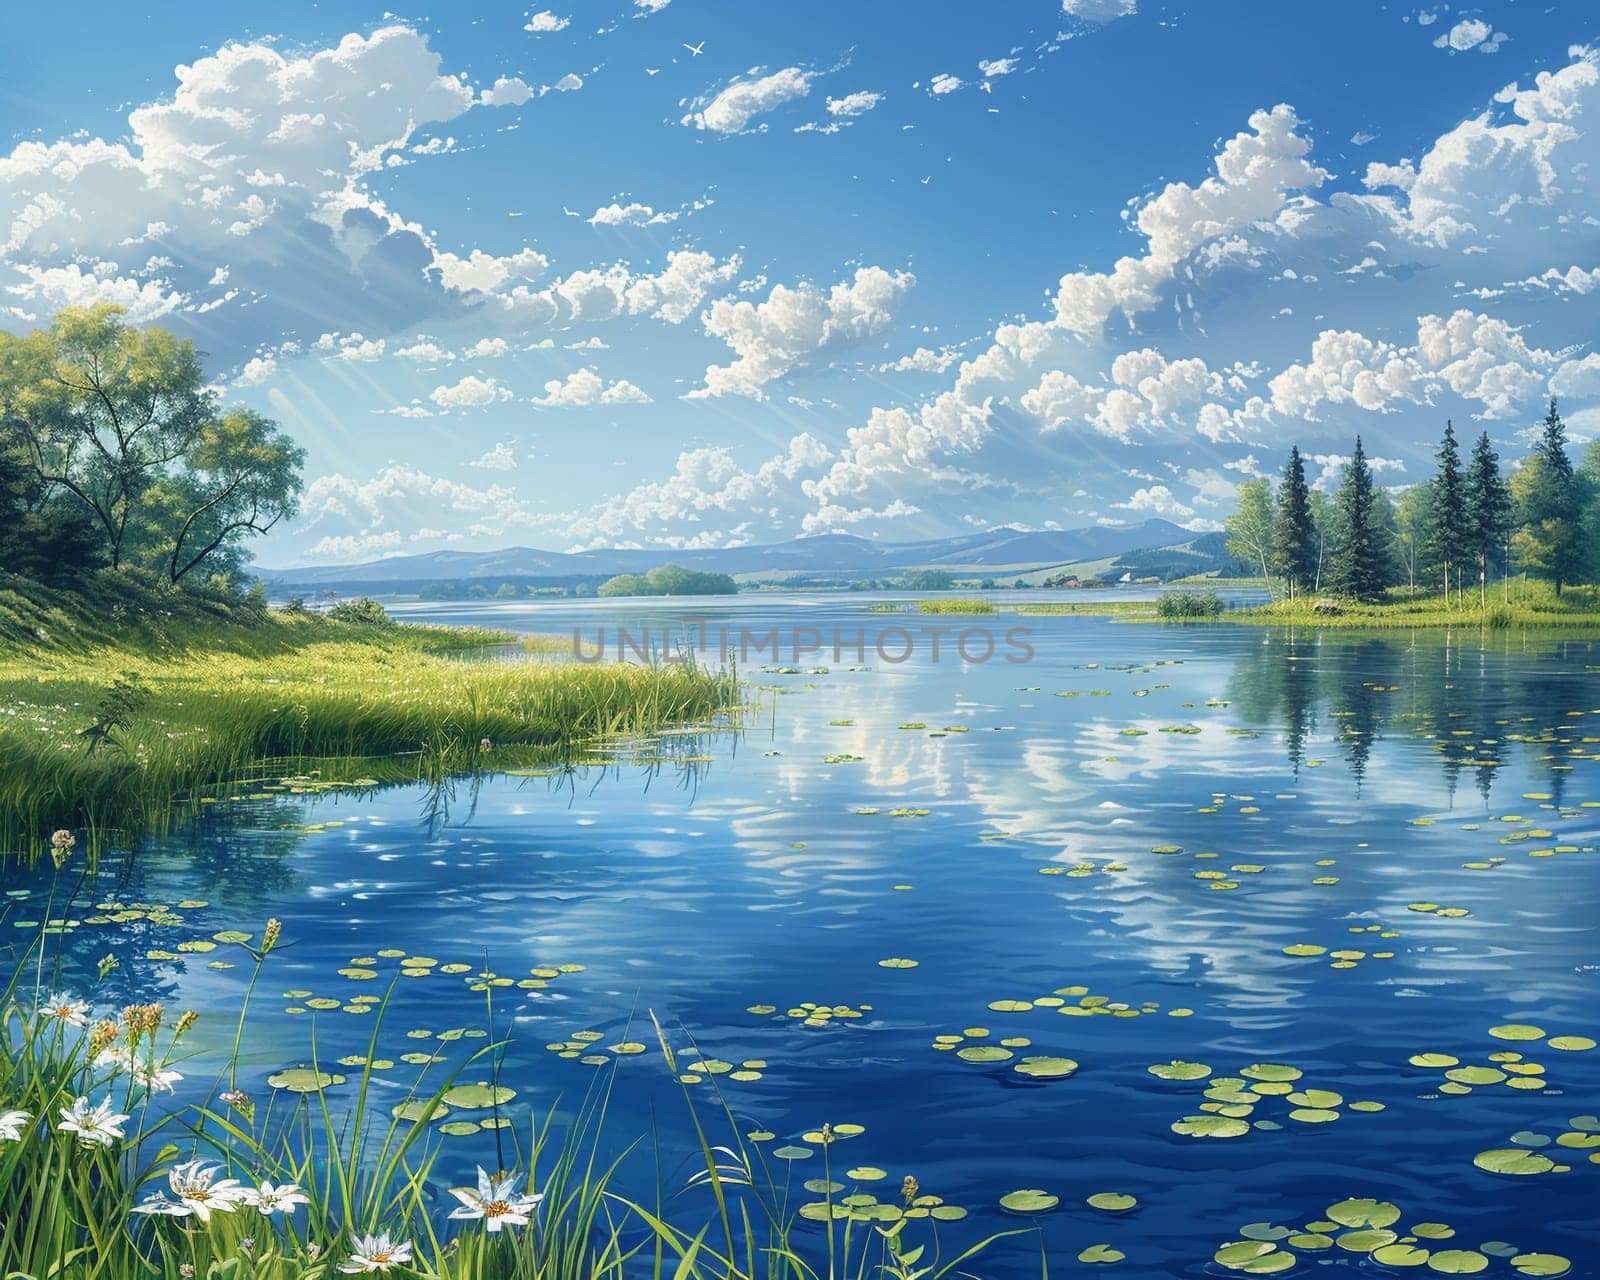 Drawing of a serene lakeside view, beautifully rendered in acrylics with reflections in the water.